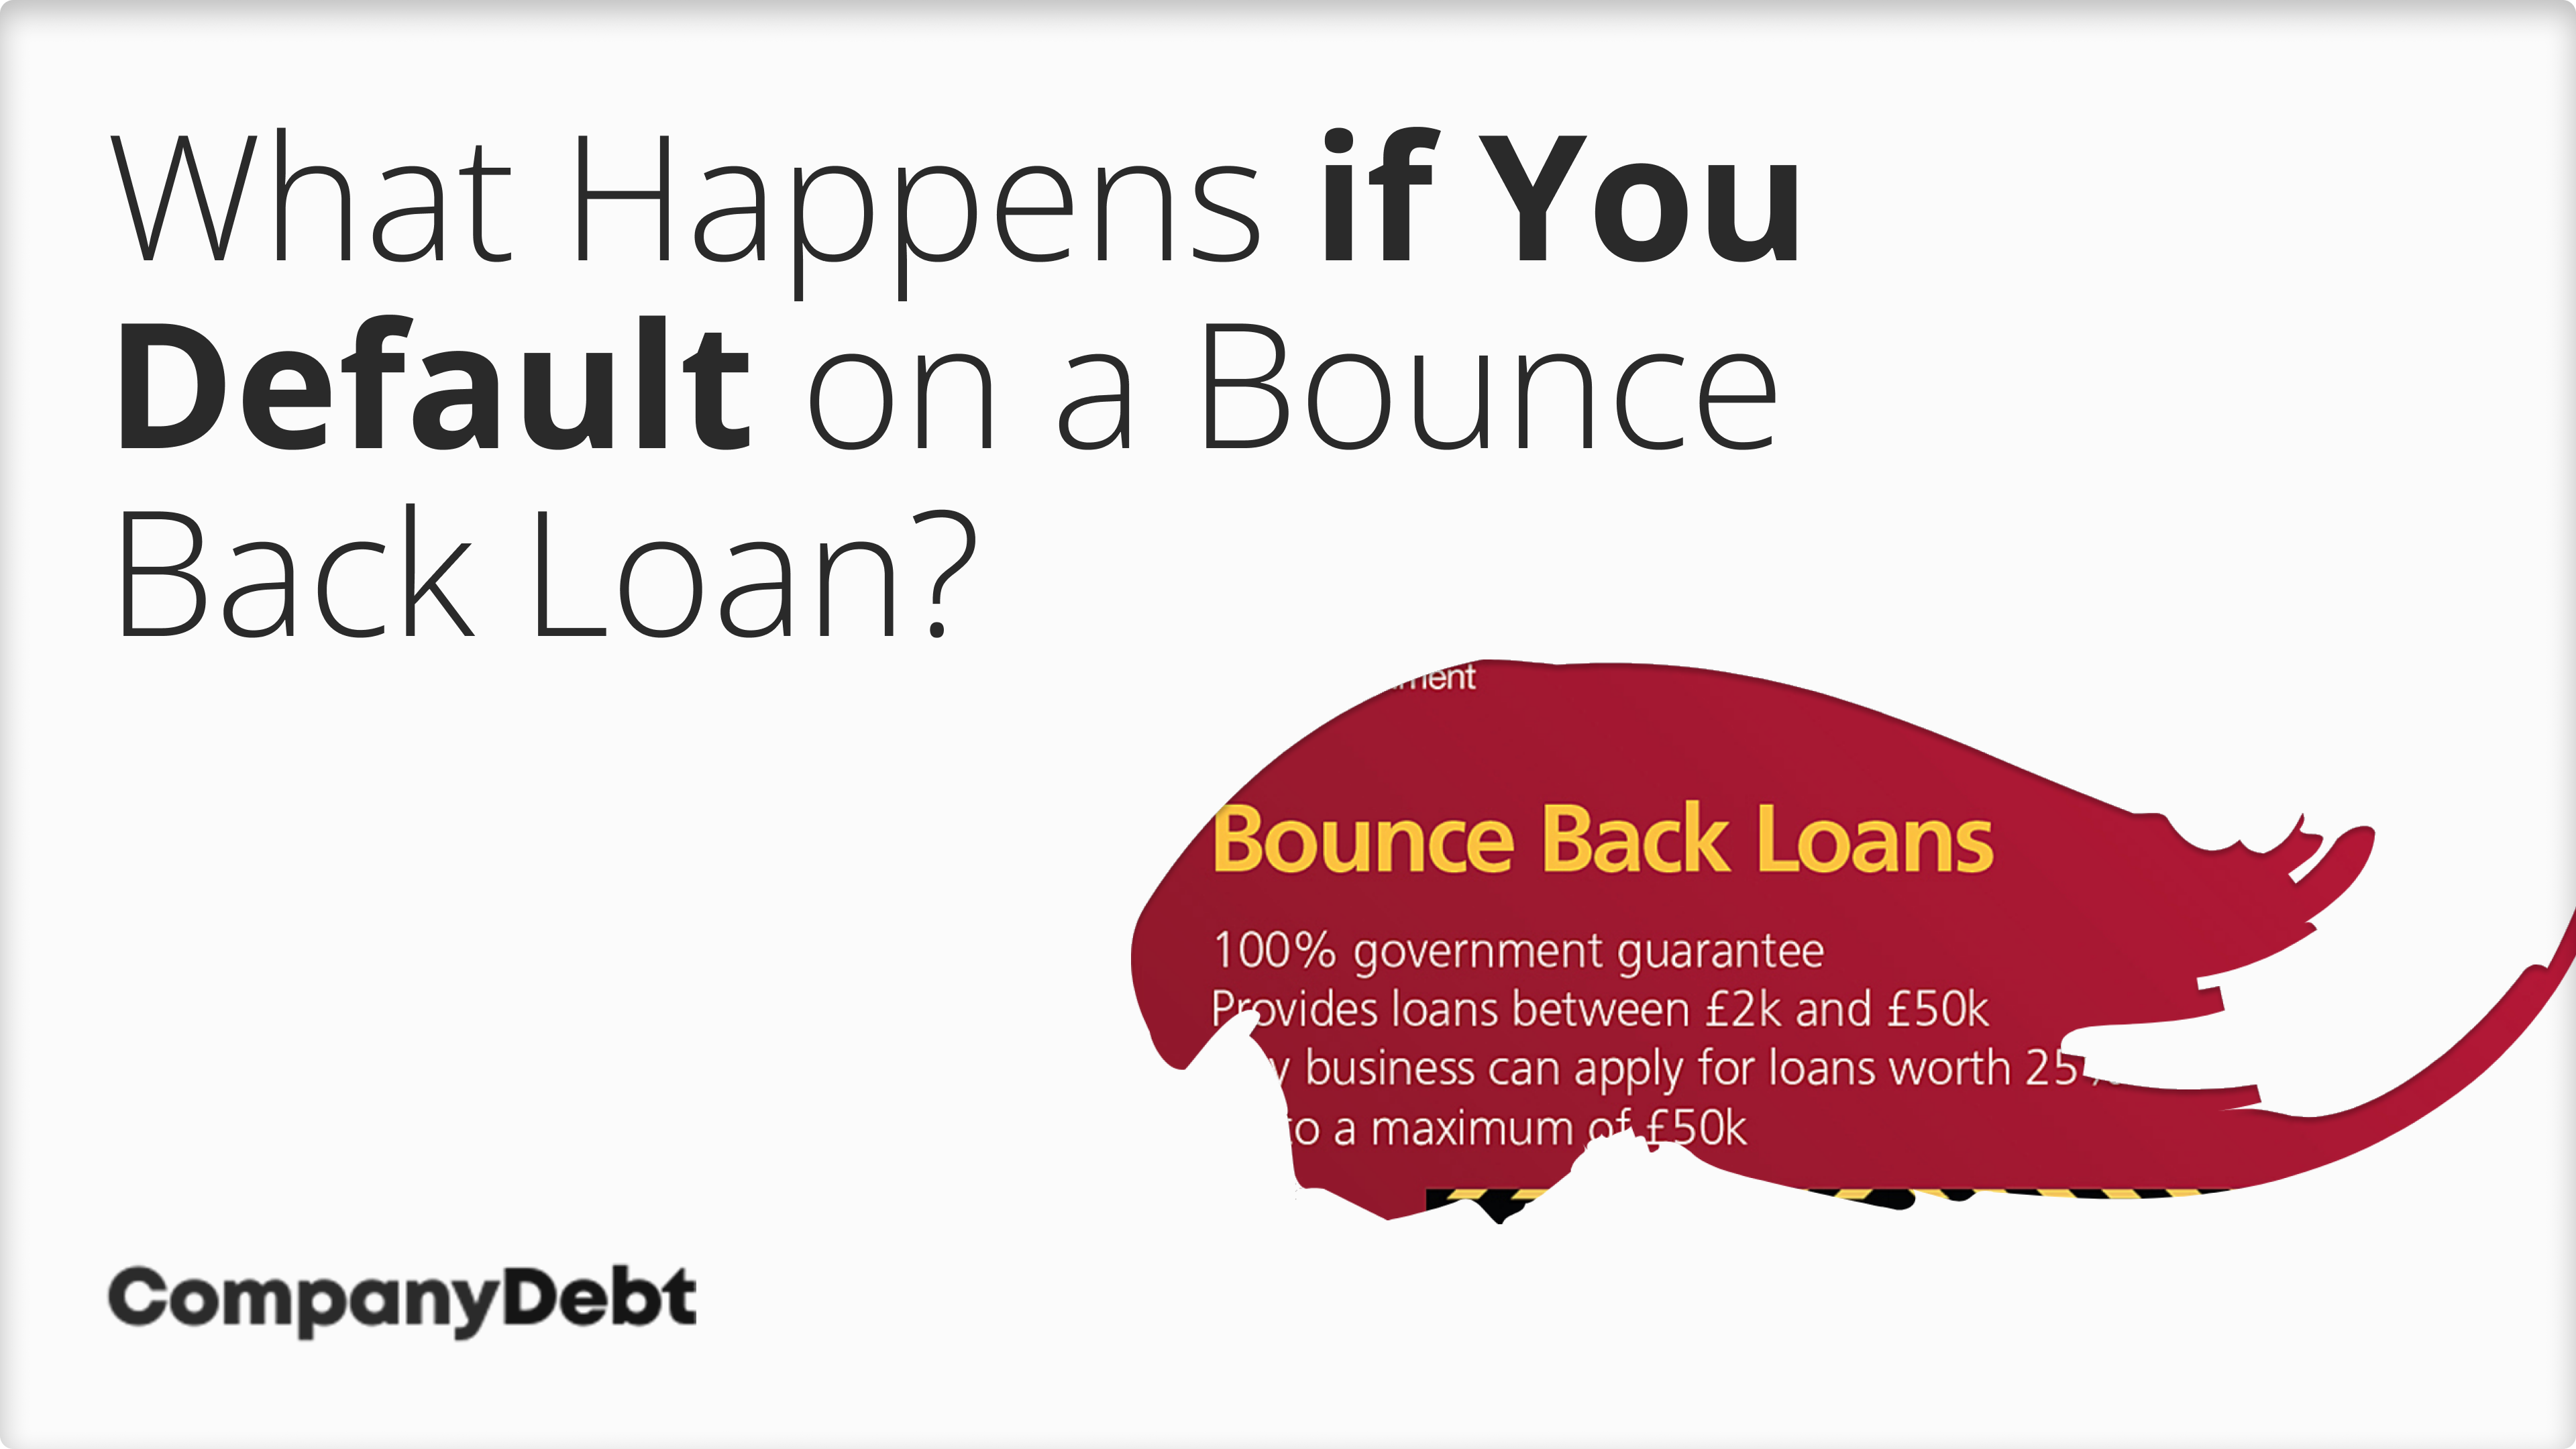 What-Happens-if-You-Default-on-a-Bounce-Back-Loan_